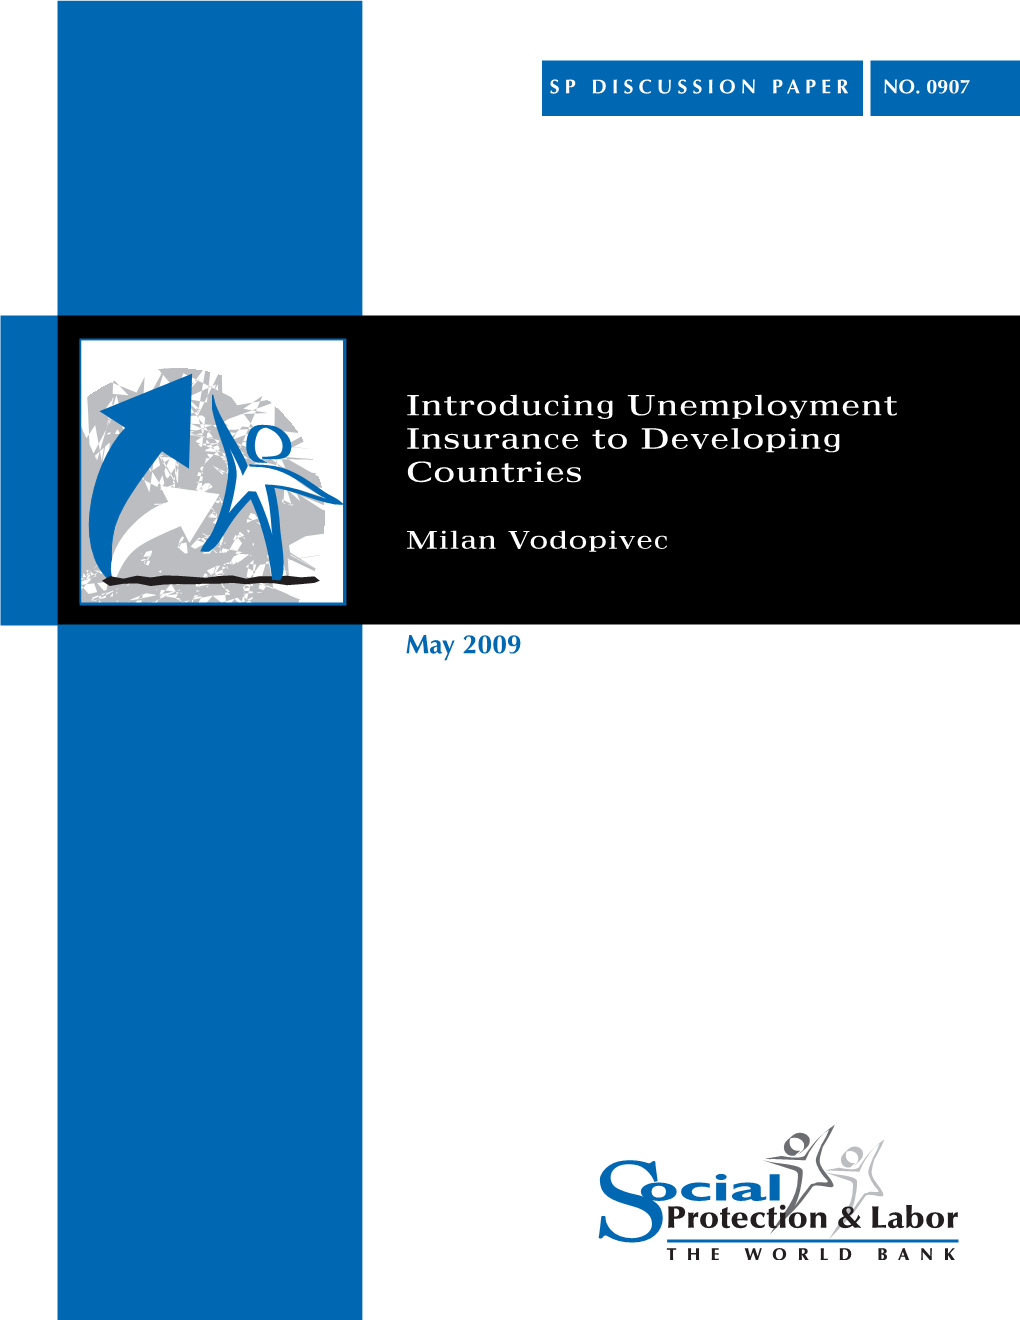 Introducing Unemployment Insurance to Developing Countries